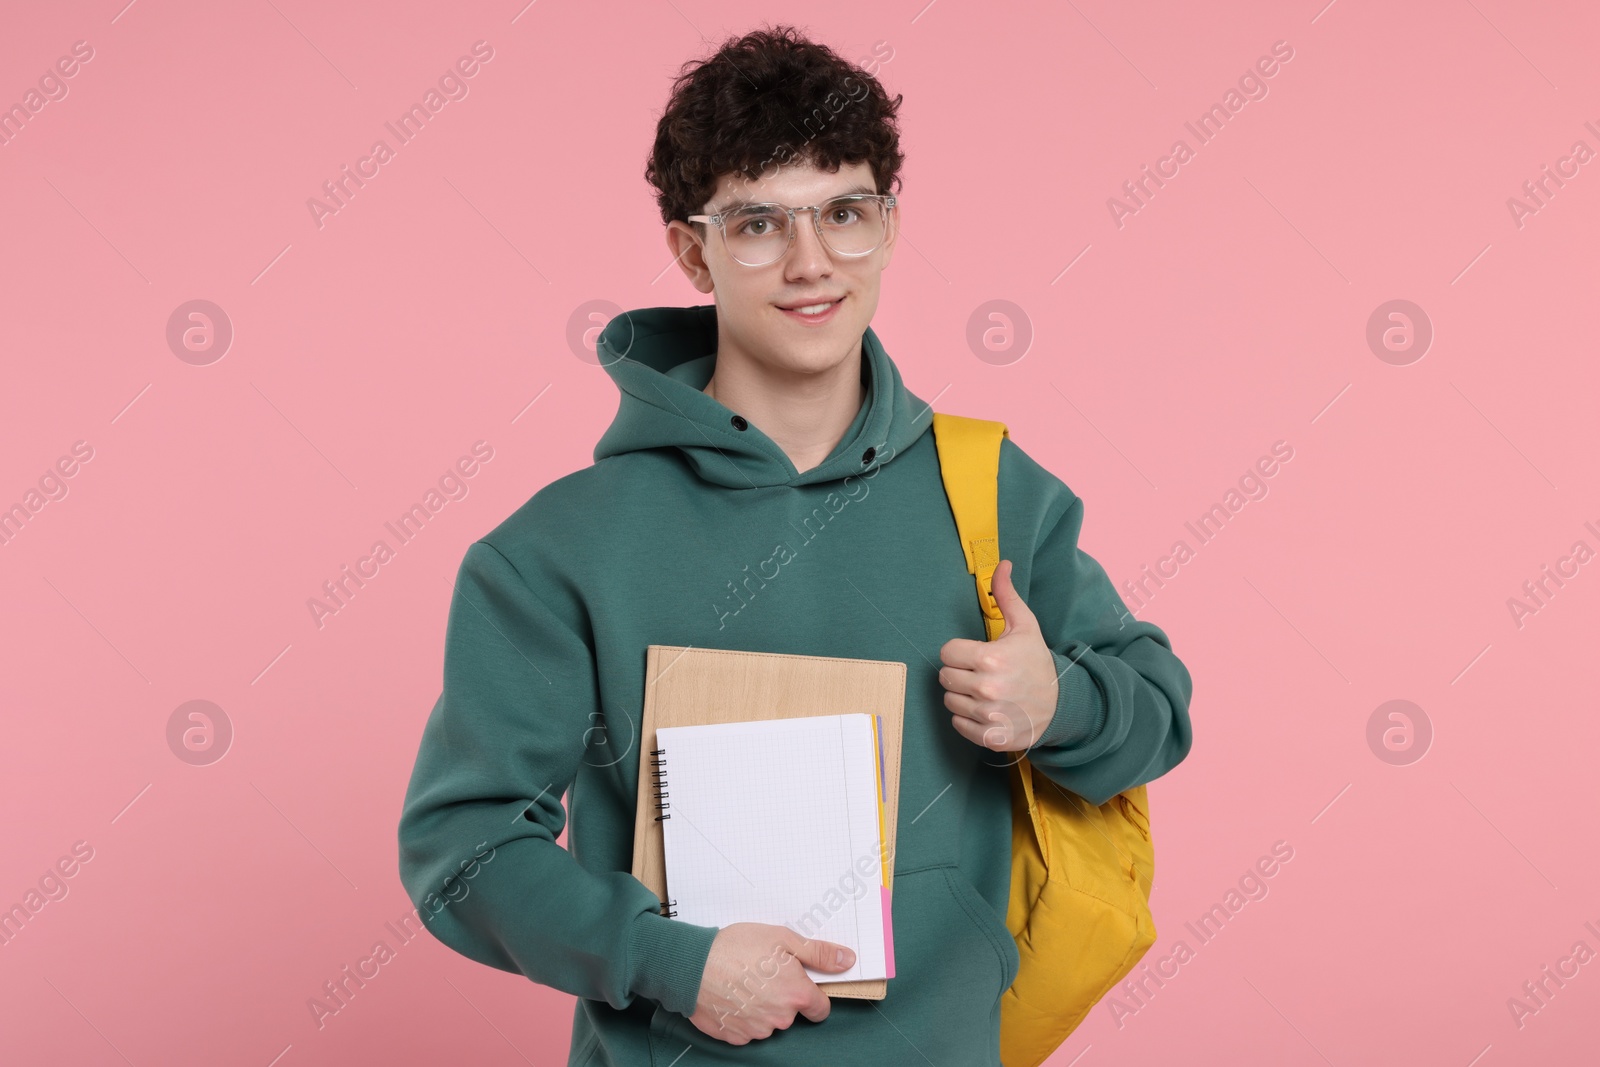 Photo of Portrait of student with backpack and notebooks on pink background